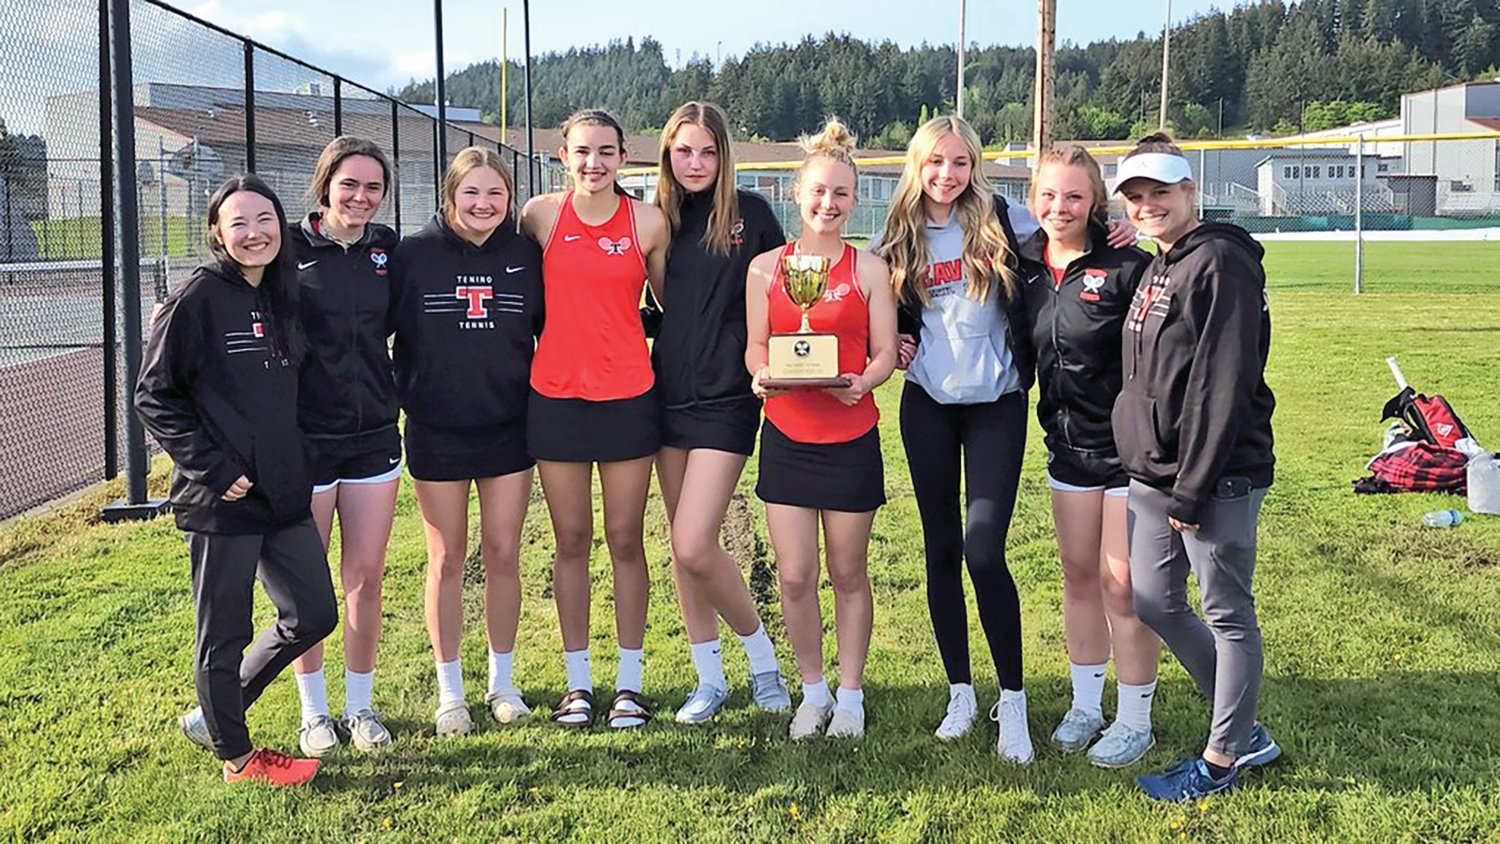 The Tenino girls tennis team poses with the 1A District 4 championship trophy after winning the team title at the District 4 girls tennis tournament Tuesday in Chehalis.